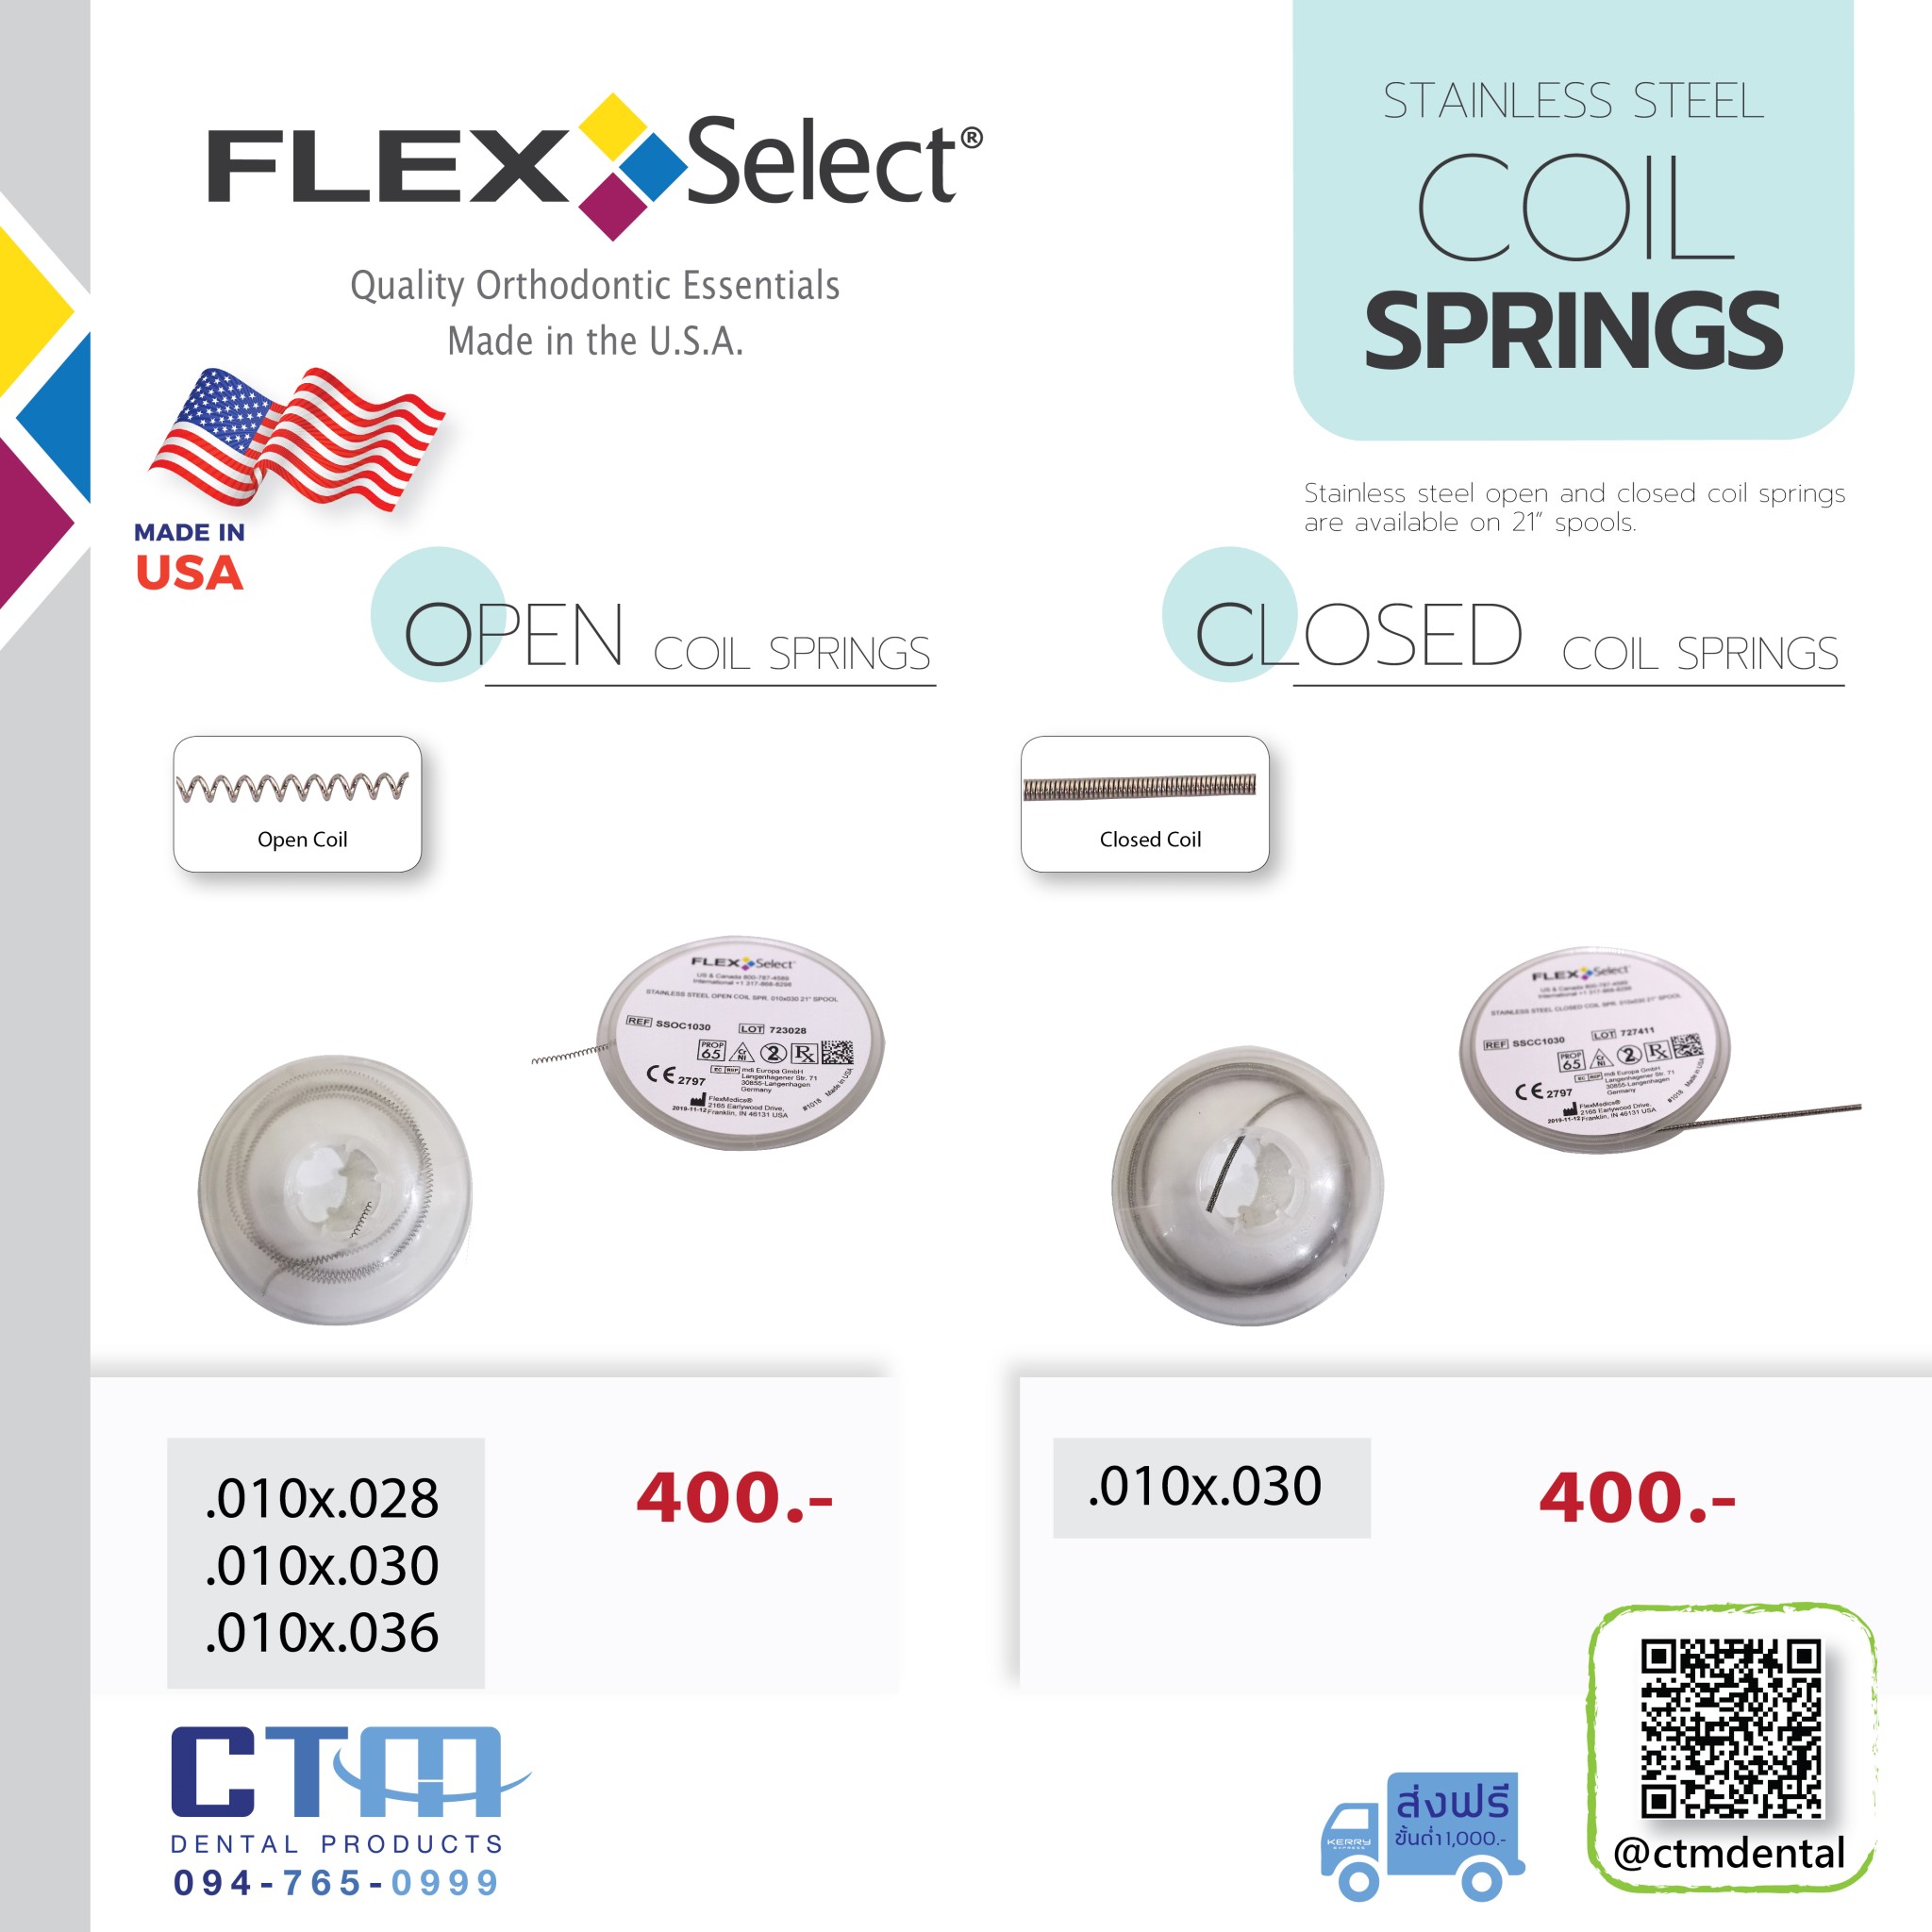 FLEX SELECT STAINLESS STEEL COIL SPRINGS